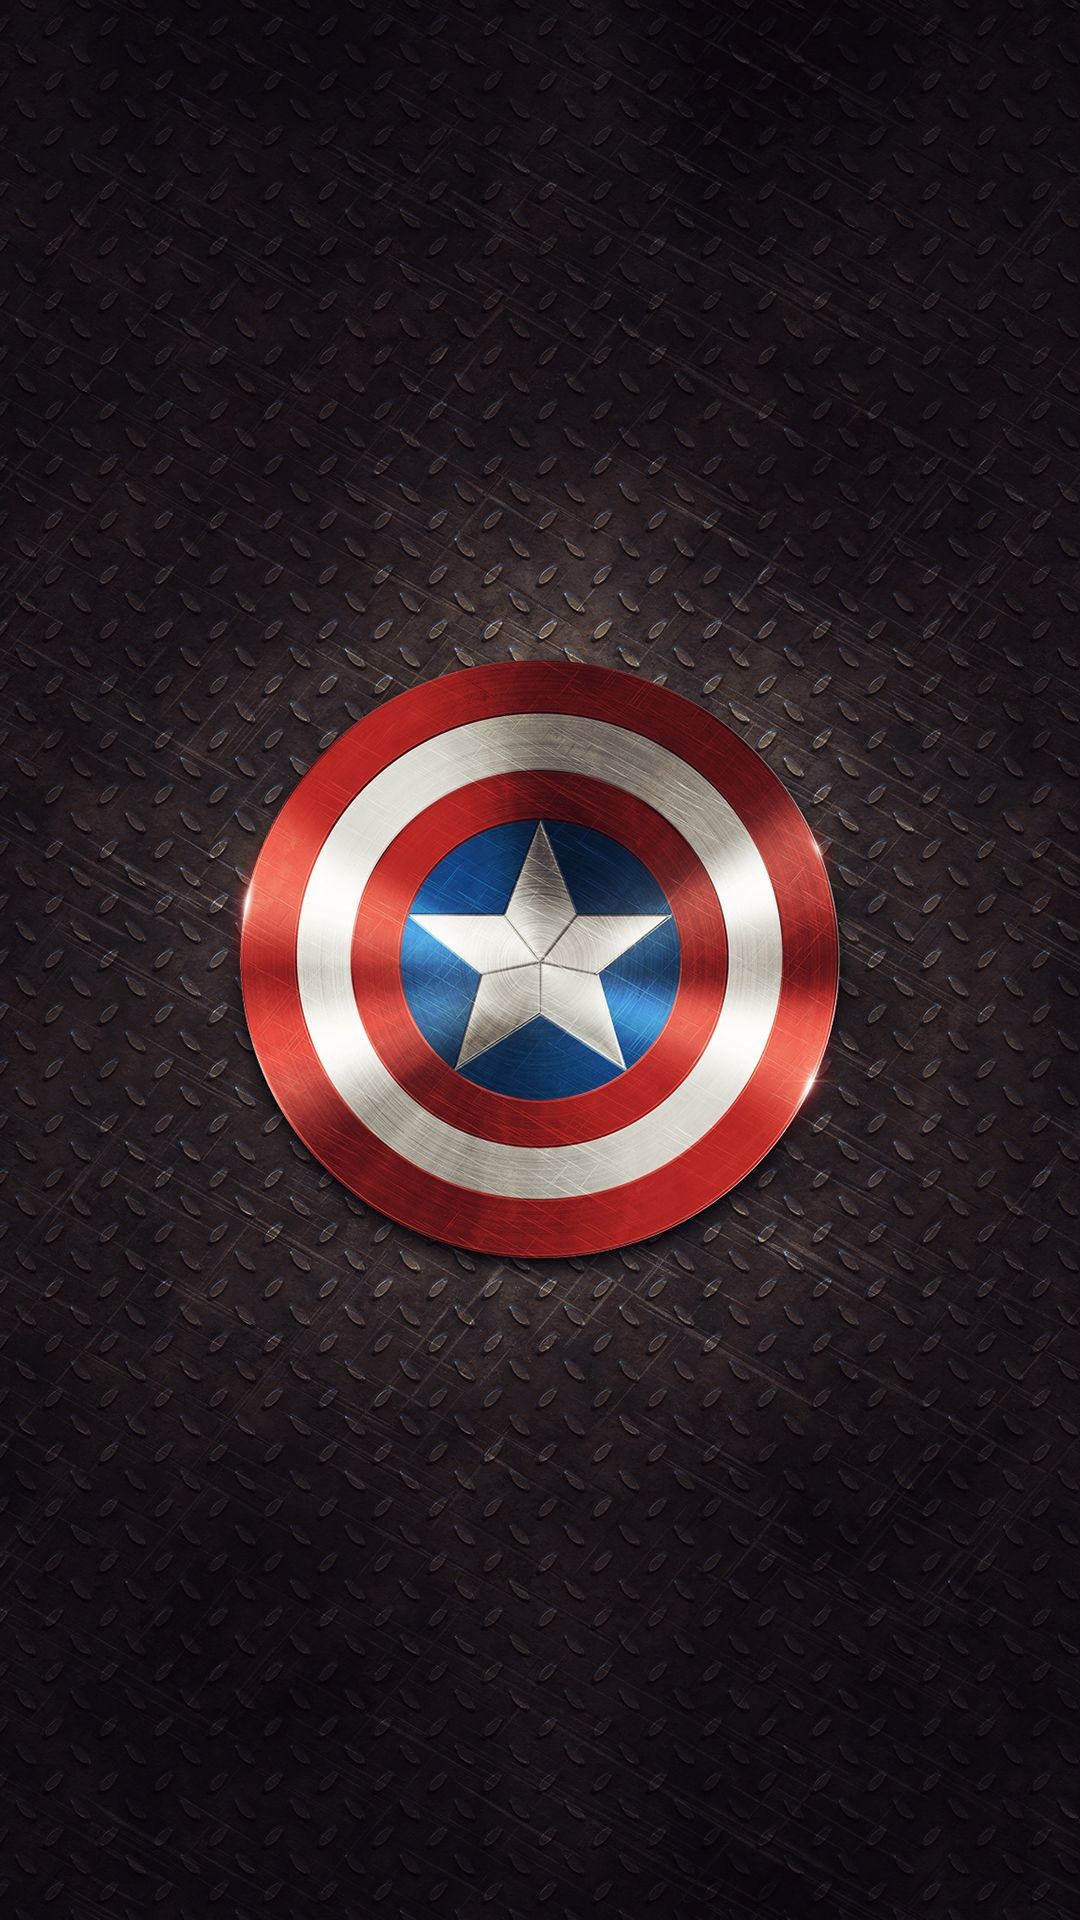 1080x1920 Download Captain America Shield Android Wallpaper